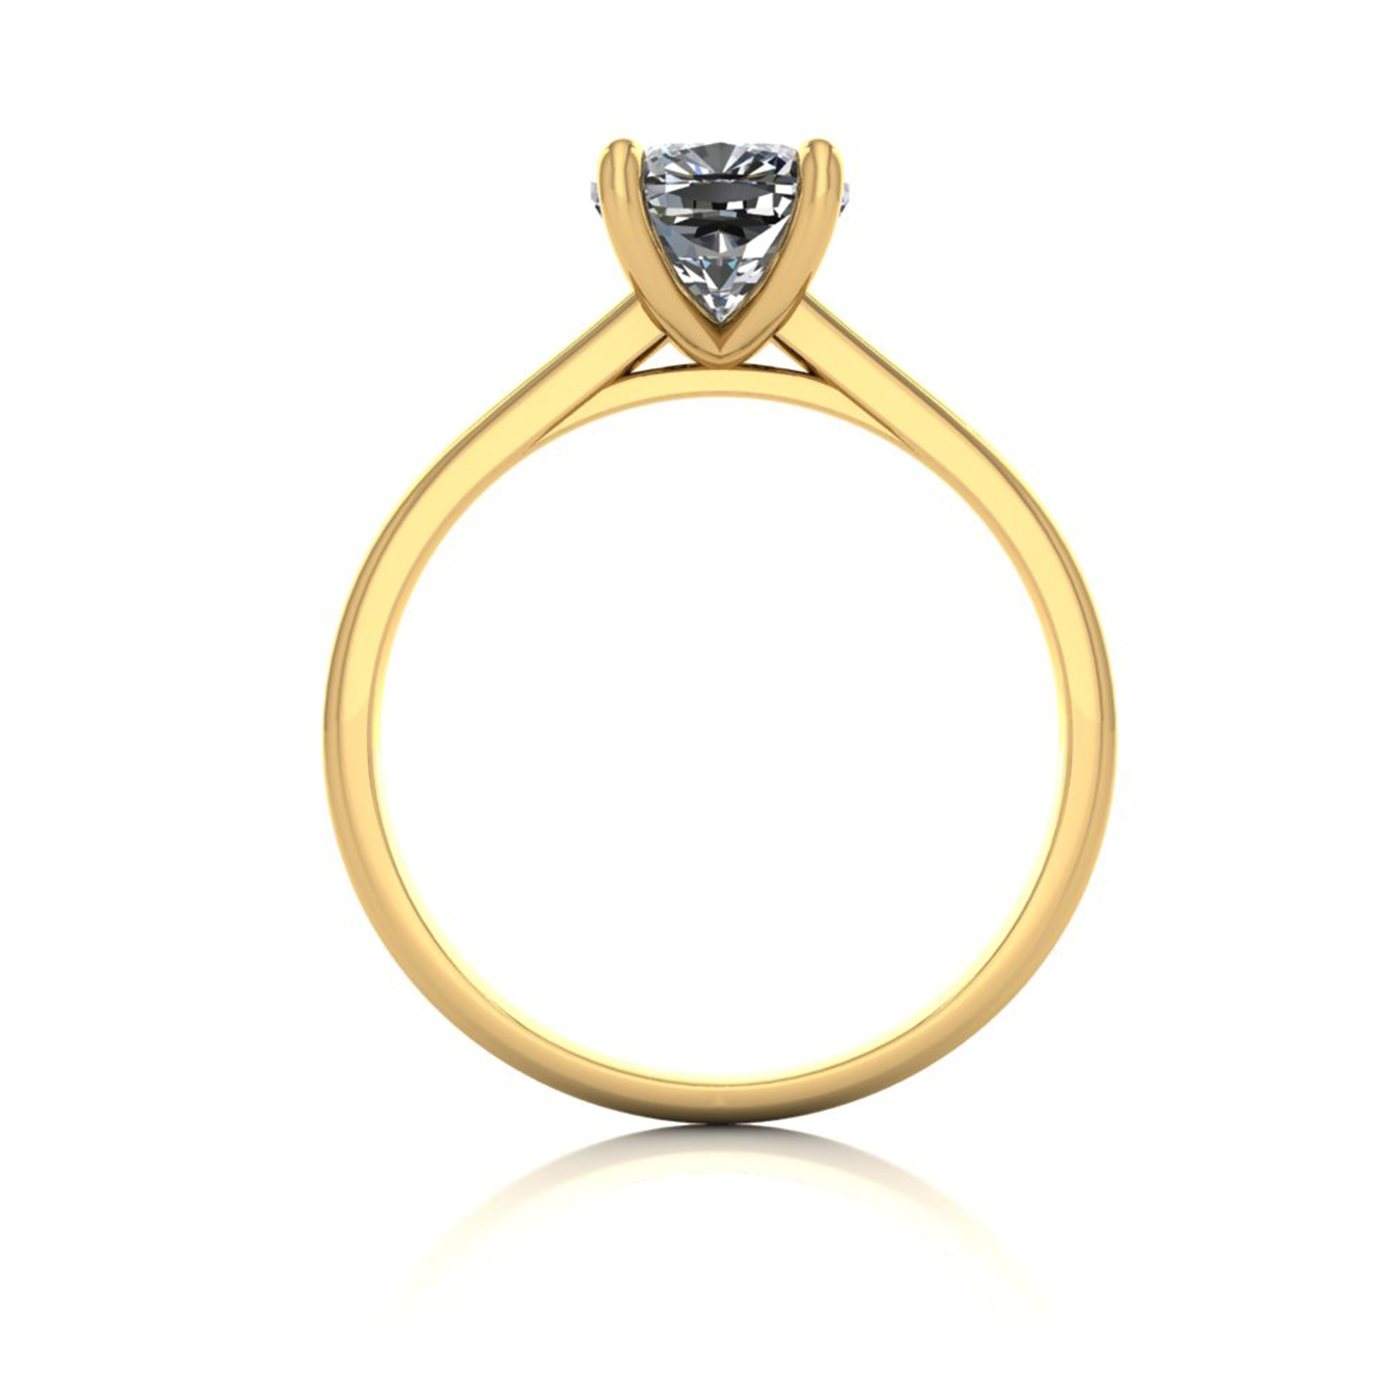 18k yellow gold 1.5ct 4 prongs solitaire cushion cut diamond engagement ring with whisper thin band